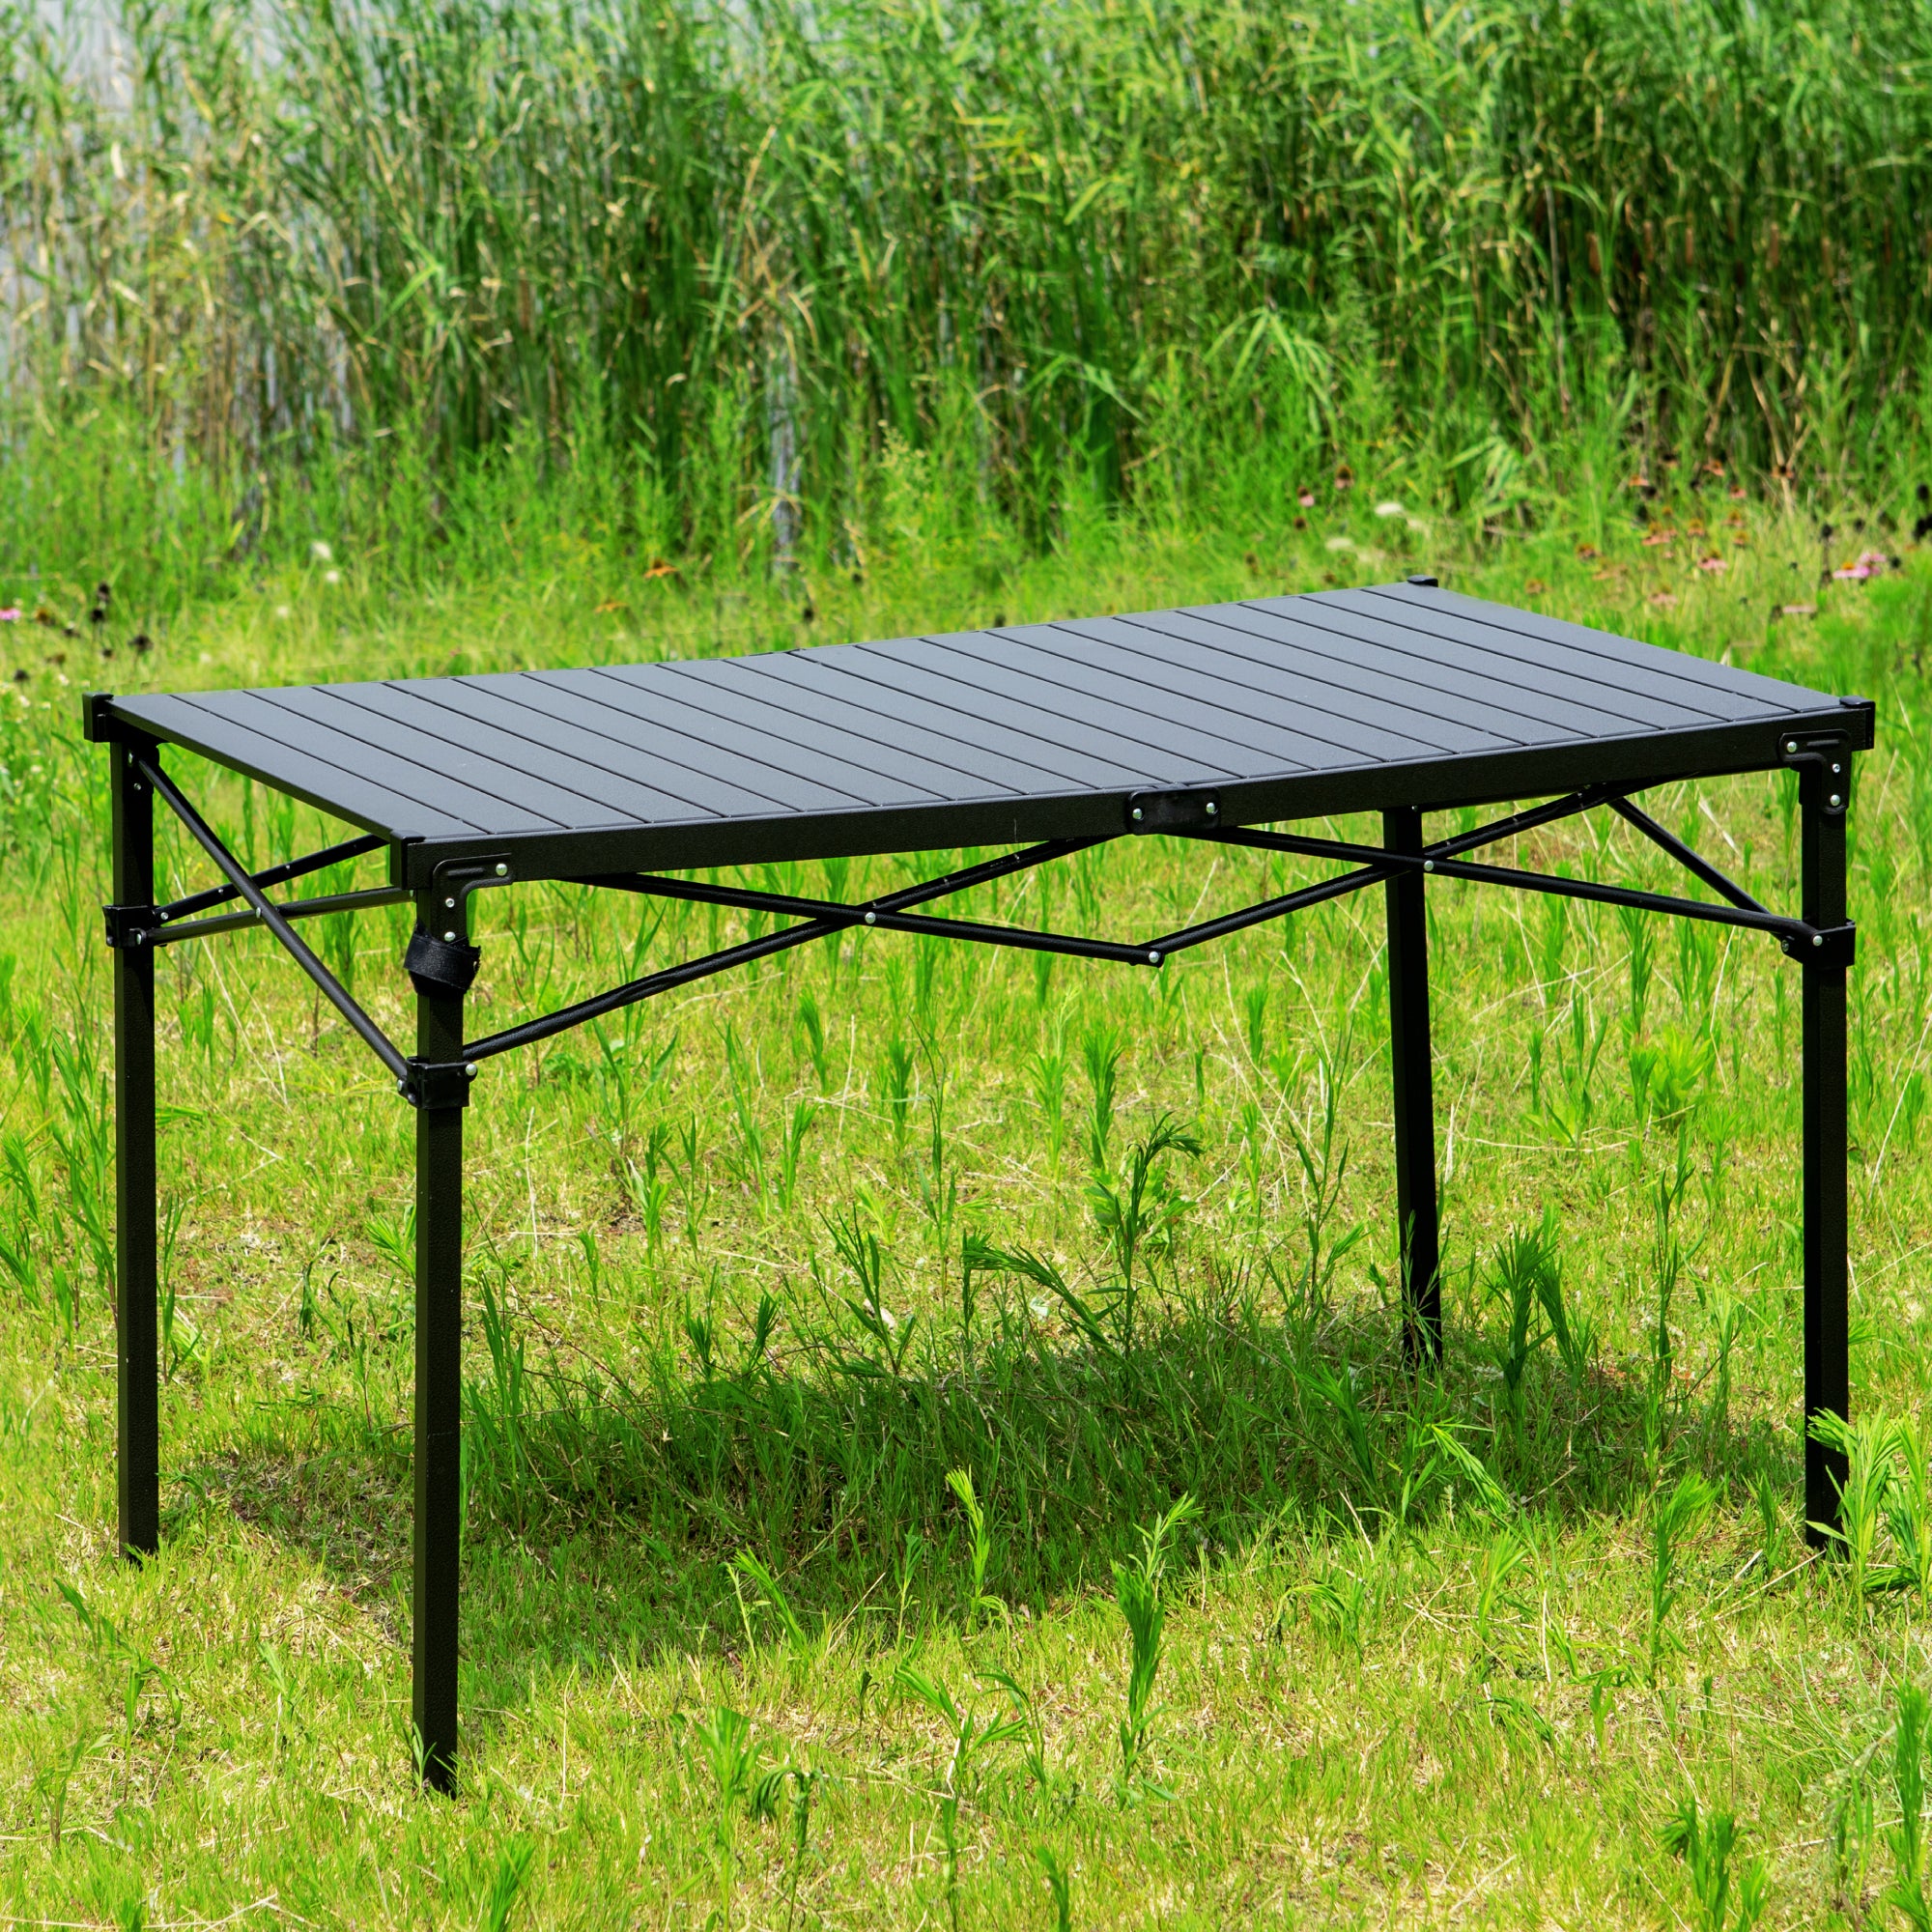 Arlmont & Co. Kelela Plastic/Resin Portable Camping Kitchen Table